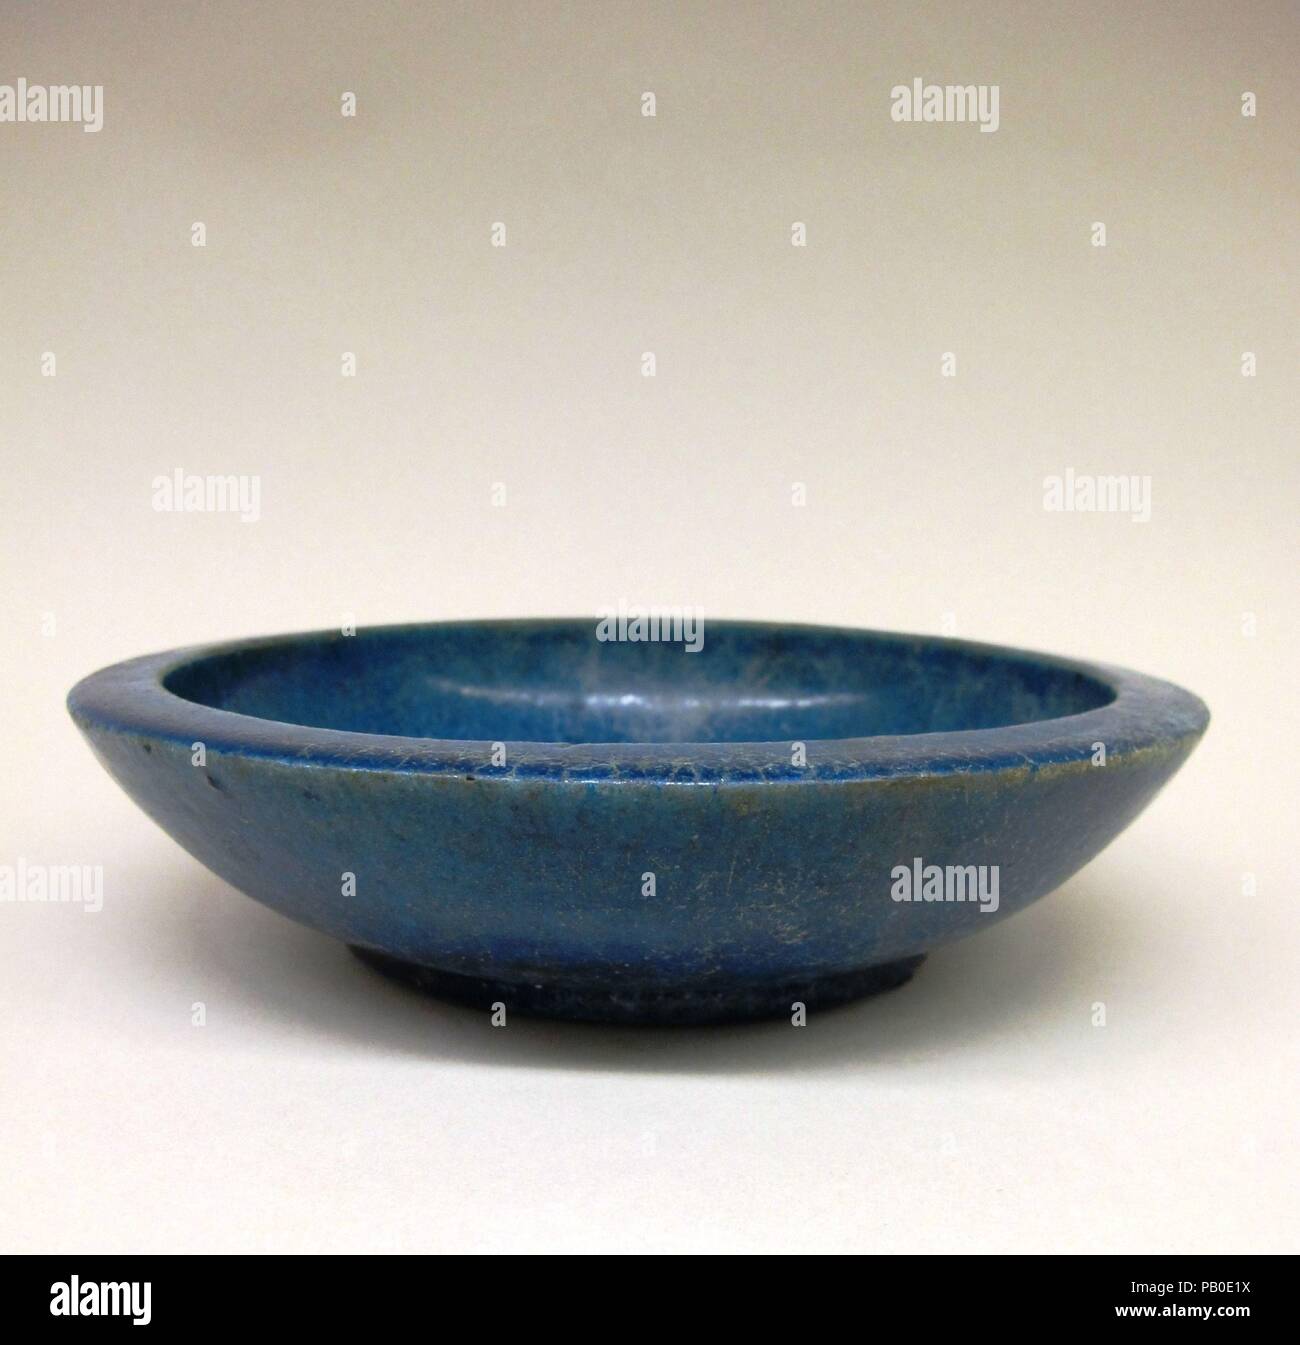 Faience bowl. Culture: Ptolemaic. Dimensions: Diam.: 8 11/16 in. (22 cm). Date: 332-30 B.C..  This bowl, preserved intact, is a fine example of Egyptian faience ware. The Egyptians mastered the production of this luxury ware as early as the late Predynastic period (late fourth millennium B.C.). Faience continued to be used for both sacred and secular objects into Hellenistic and Roman times. Museum: Metropolitan Museum of Art, New York, USA. Stock Photo